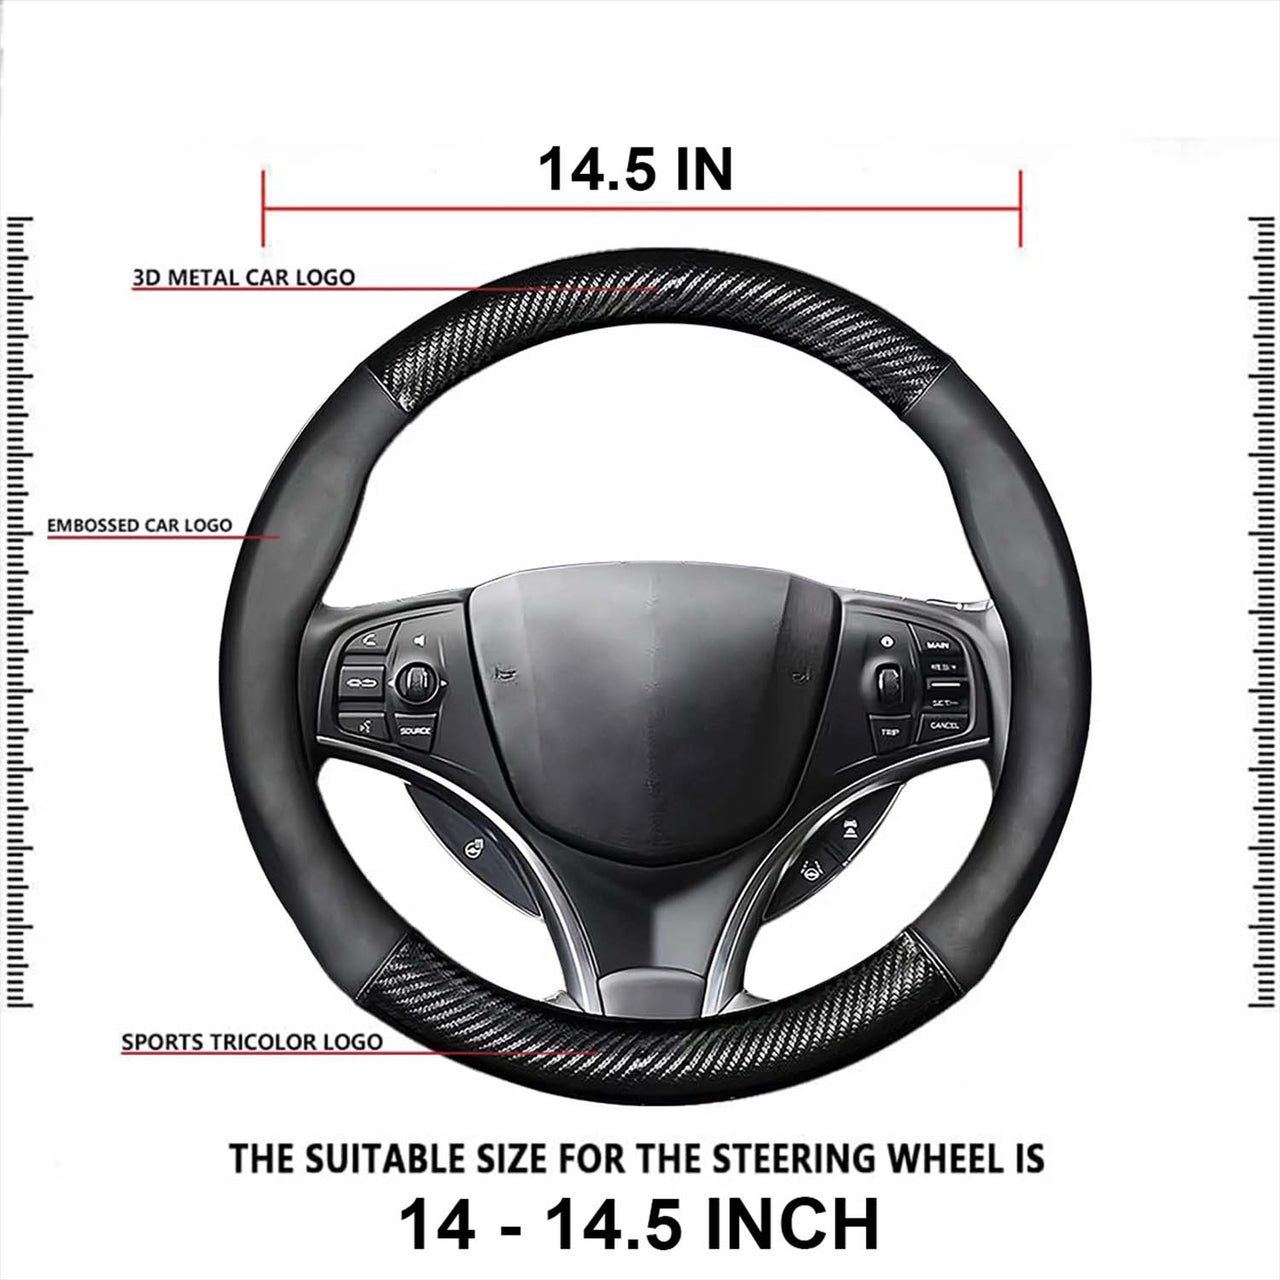 Custom  Car Steering Wheel Cover, Custom Fit For Your Cars, Leather Nonslip 3D Carbon Fiber Texture Sport Style Wheel Cover for Women, Interior Modification for All Car Accessories AC18992